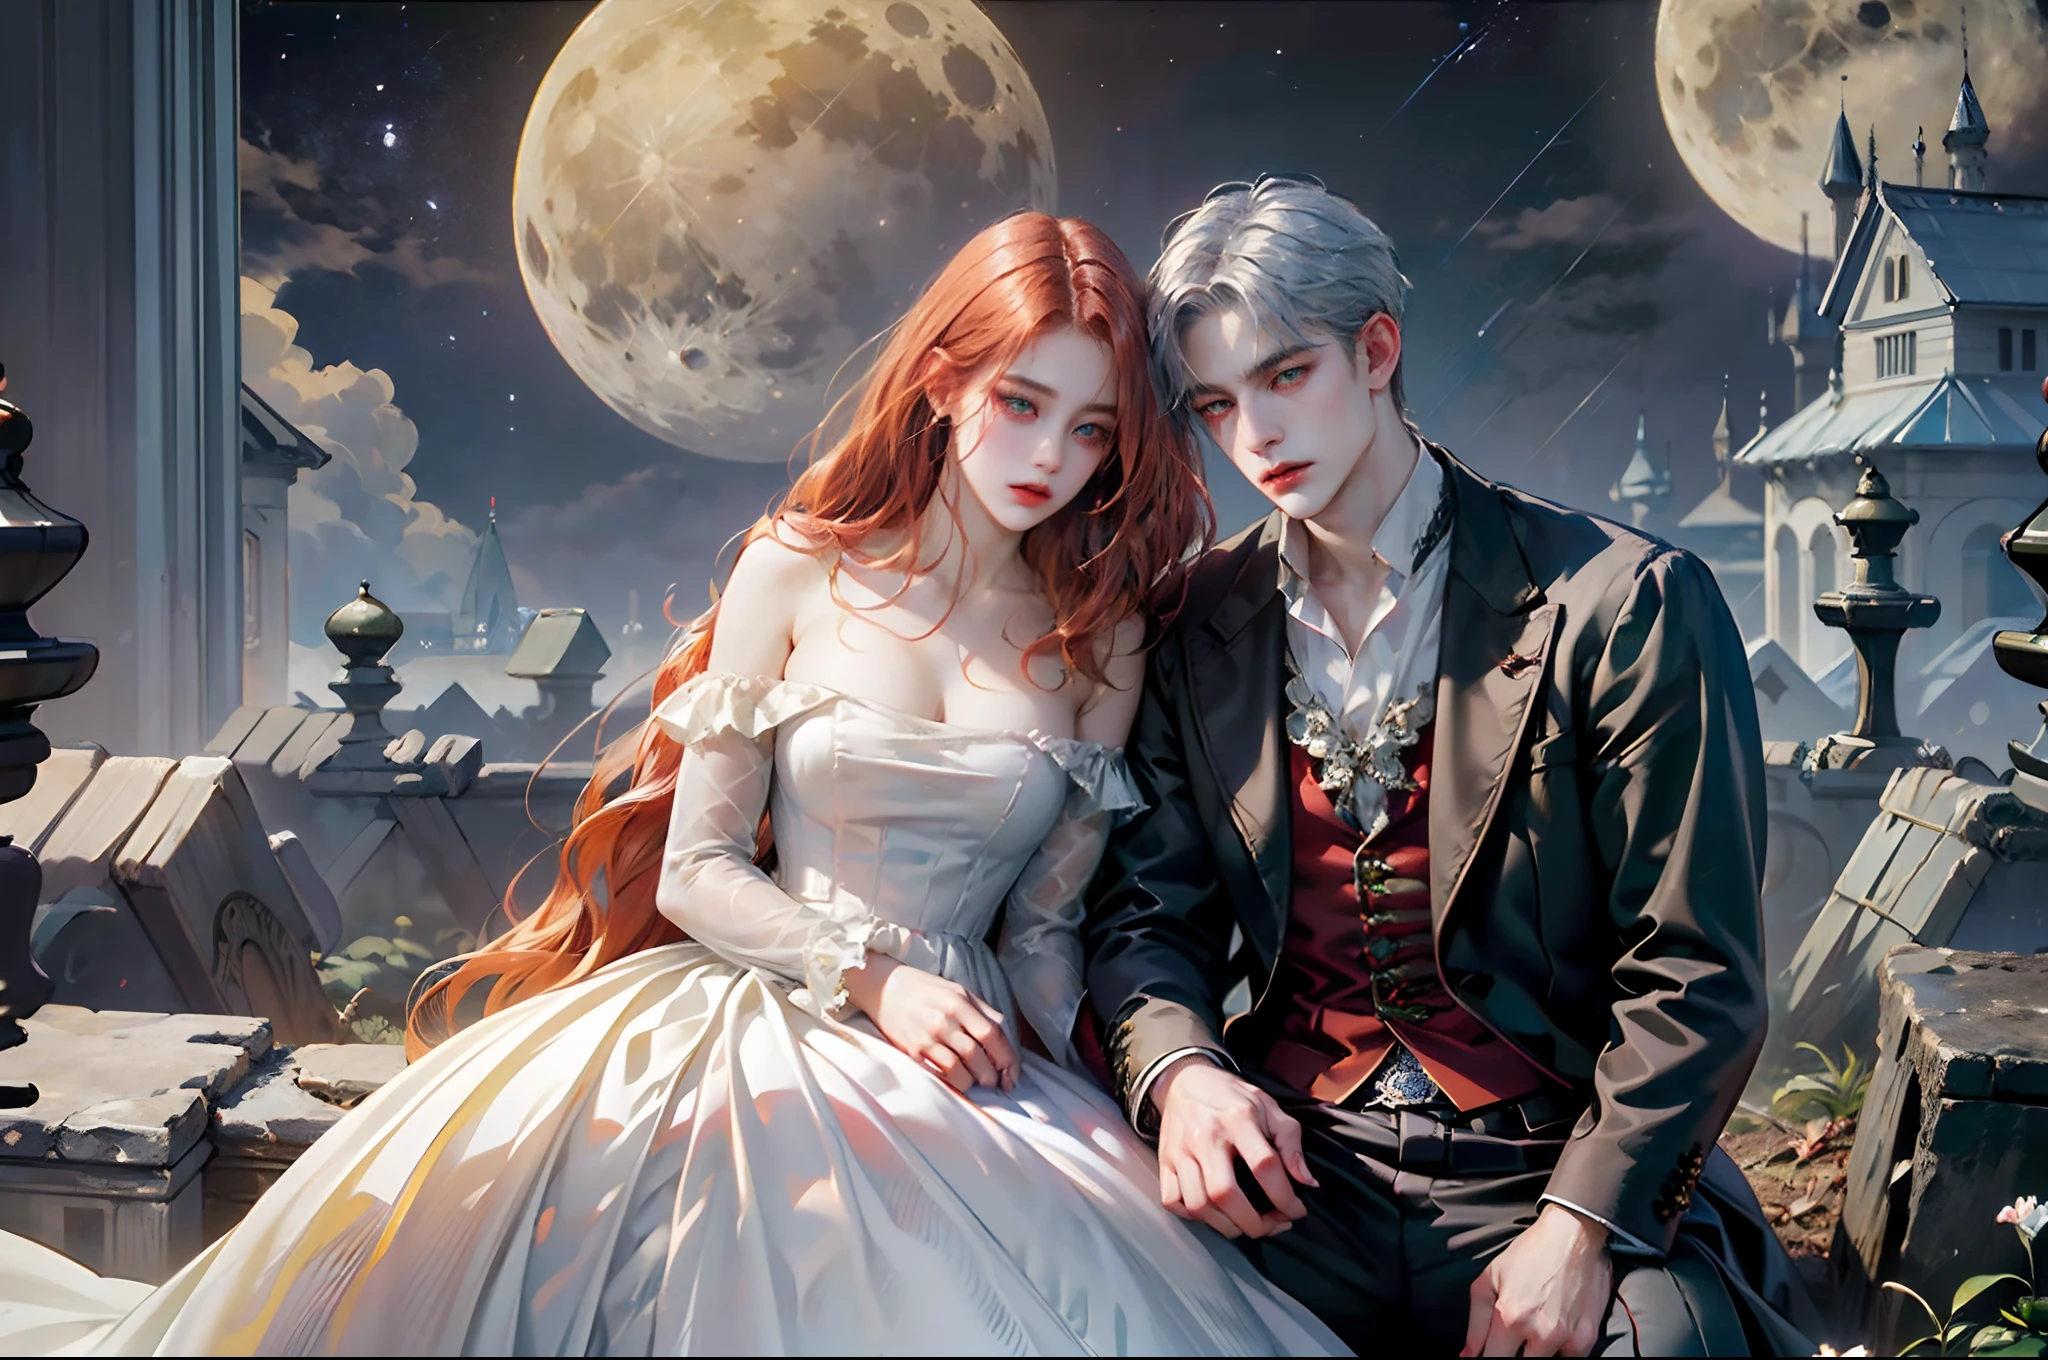 \(Style\): { (masterpiece:1.2, best quality, victorian era, neo-romanticism, romanticism art style, perfect shot) }, \(Composition\): { (couple lovers, young aggressive girl, dangerous vampire boy) }, \(Appearance\): { (mature male with red eyes and silver hair: 1.2),(girl with red hair and bright green eyes: 1.2), (the girl is wearing a dress with a deep neckline: 1.0) }, \(Location\): {( evening time, the moon rises above the horizon, a Gothic castle in the background)}, a detailed painting, pixiv contest winner, artwork in the style of wlop and sakimichan, eros and psyche.